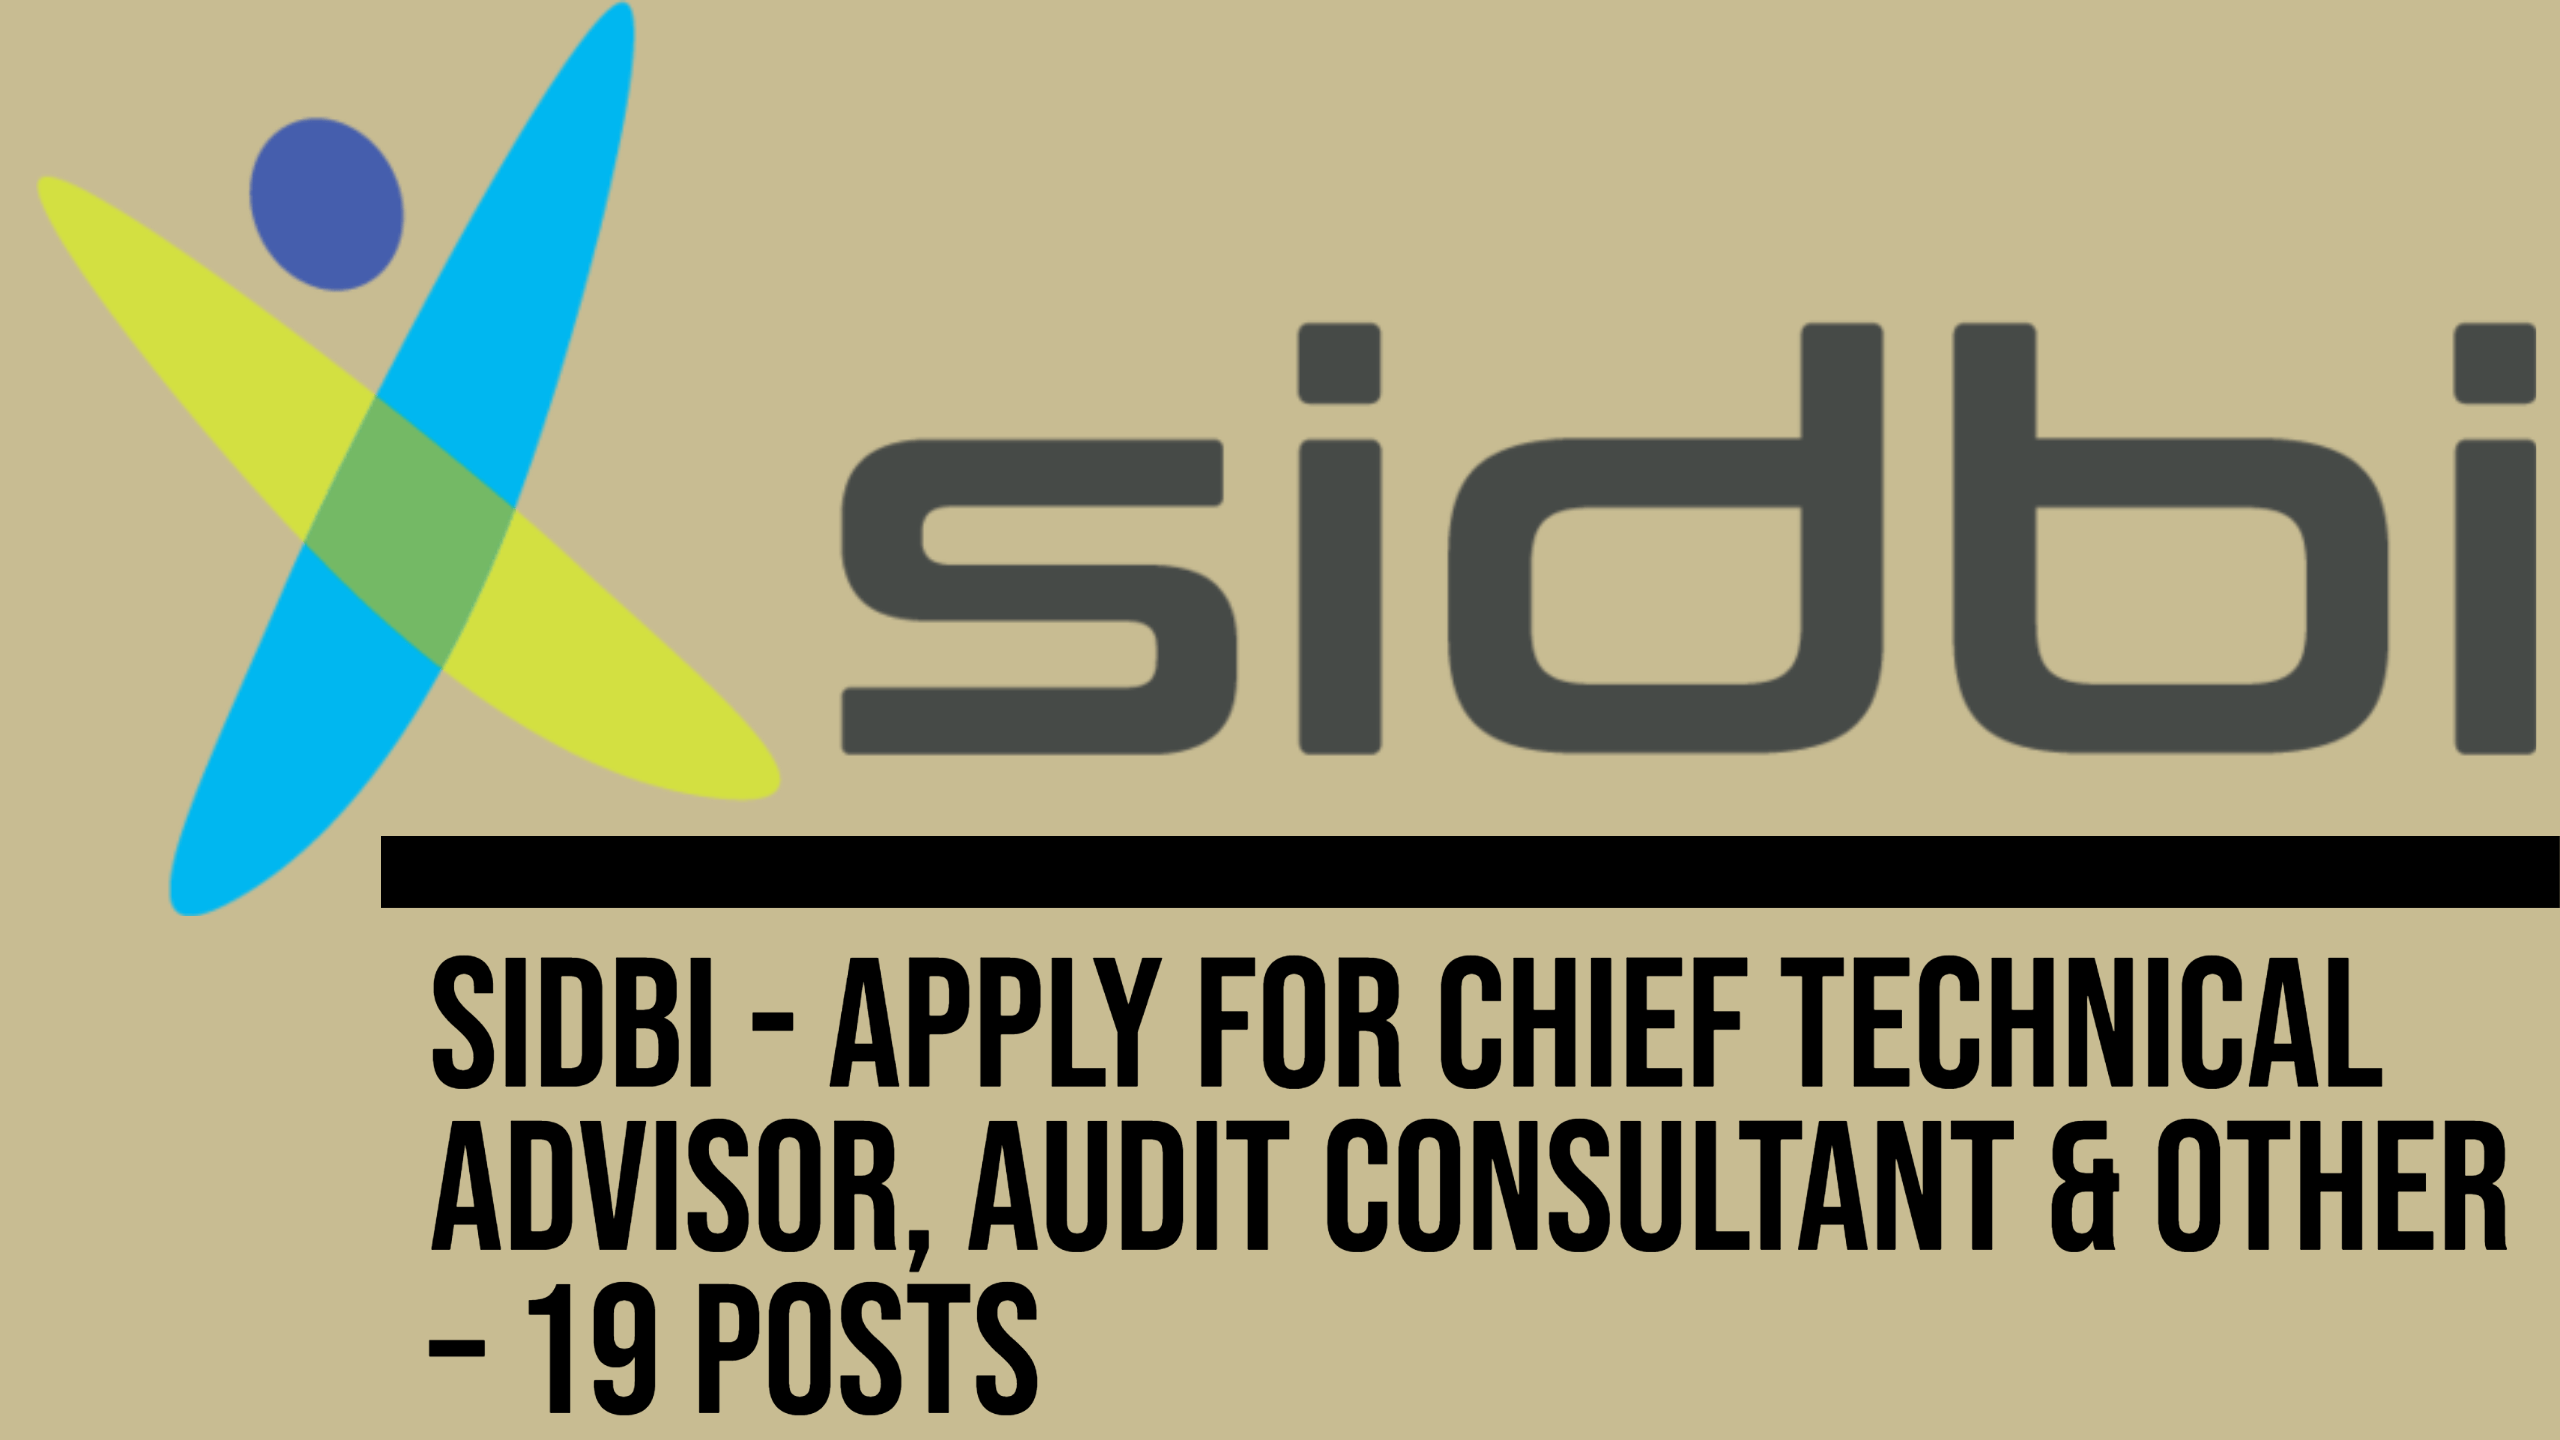 SIDBI - Apply For Chief Technical Advisor, Audit Consultant & Other – 19 Posts